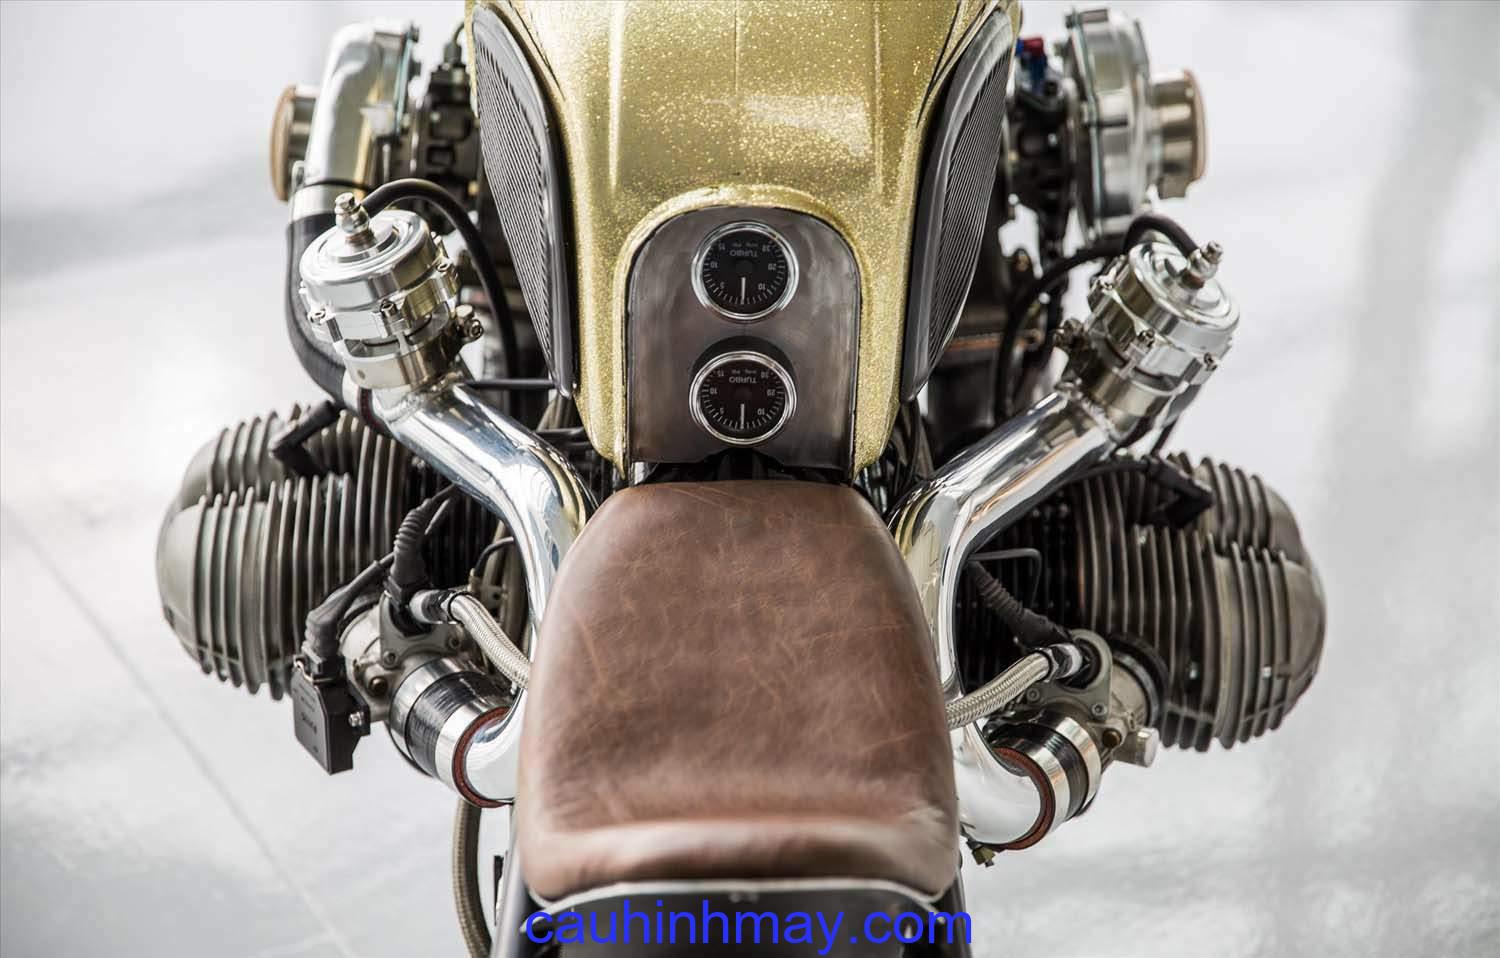 BMW R100 TWIN TURBO BY BOXER METAL  - cauhinhmay.com